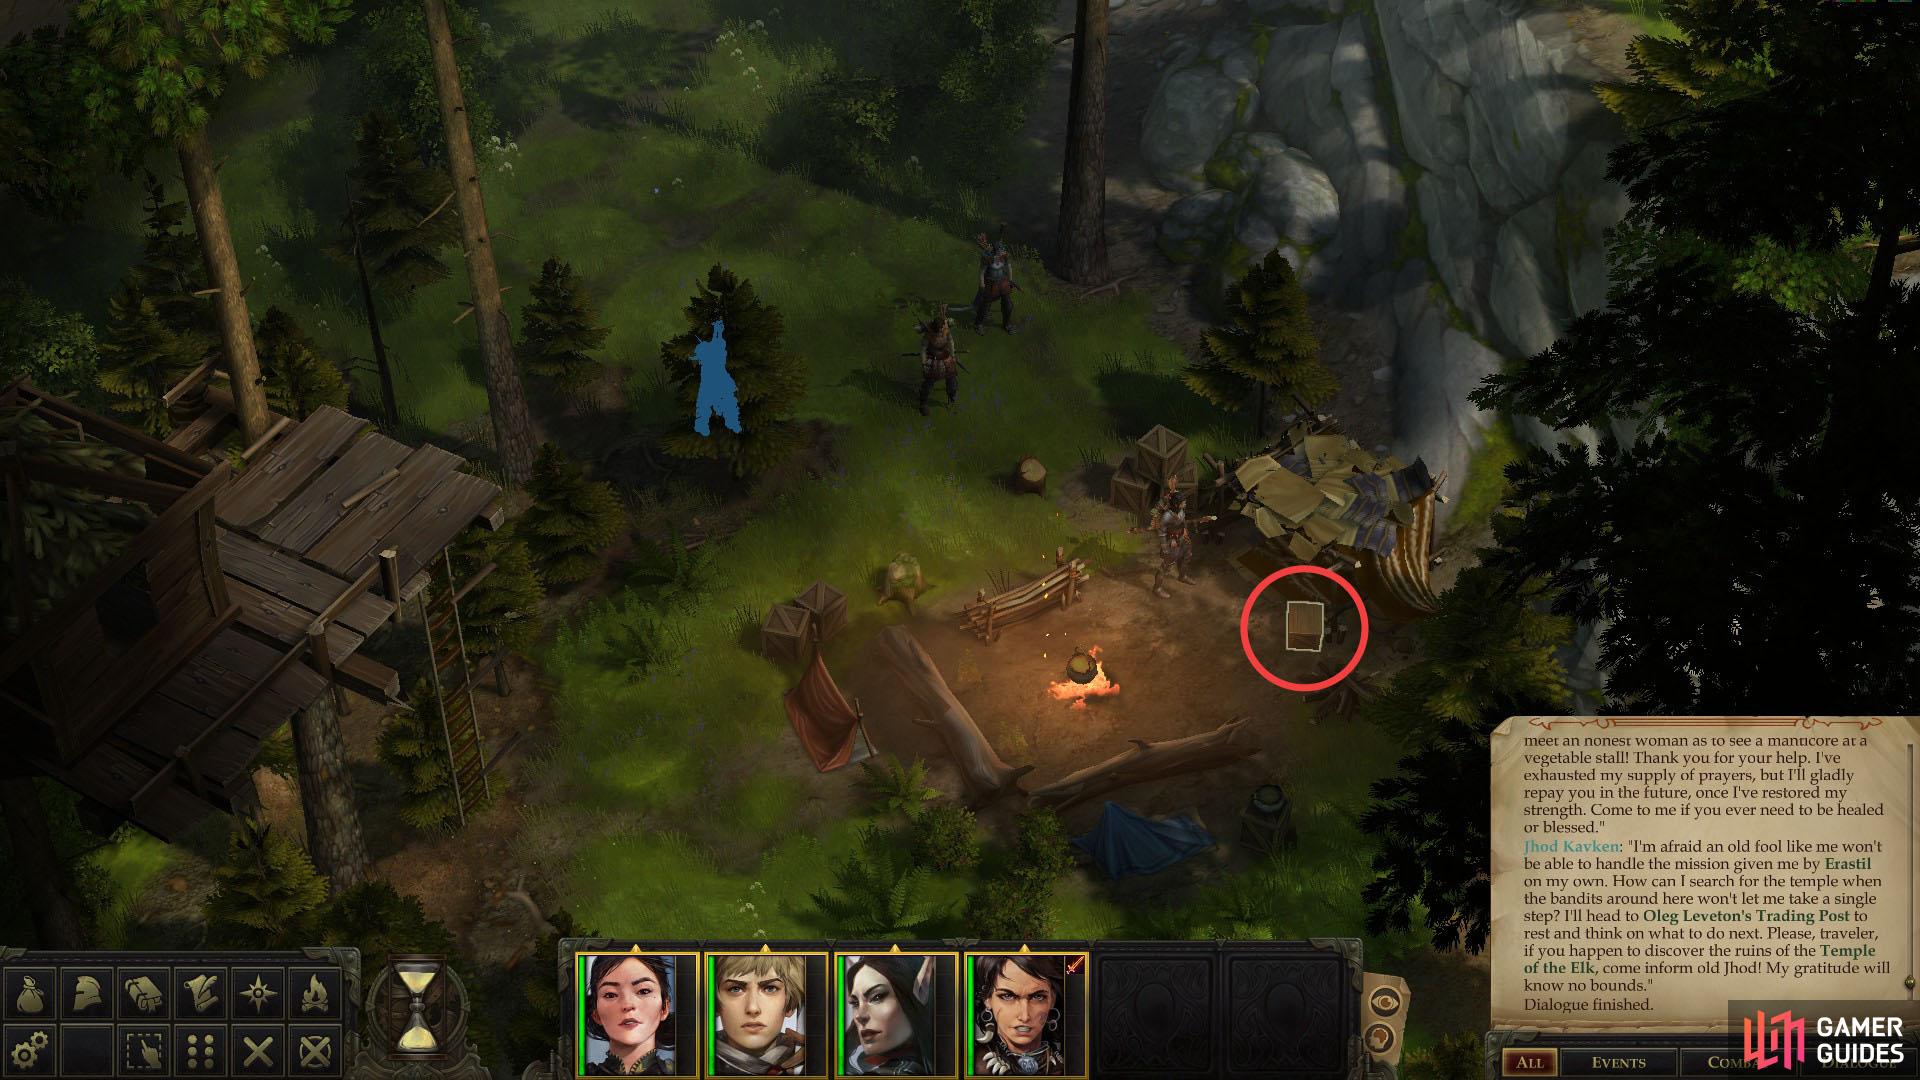 Loot Kressle's Camp to find the Stag Lord's orders, giving you a new objective.